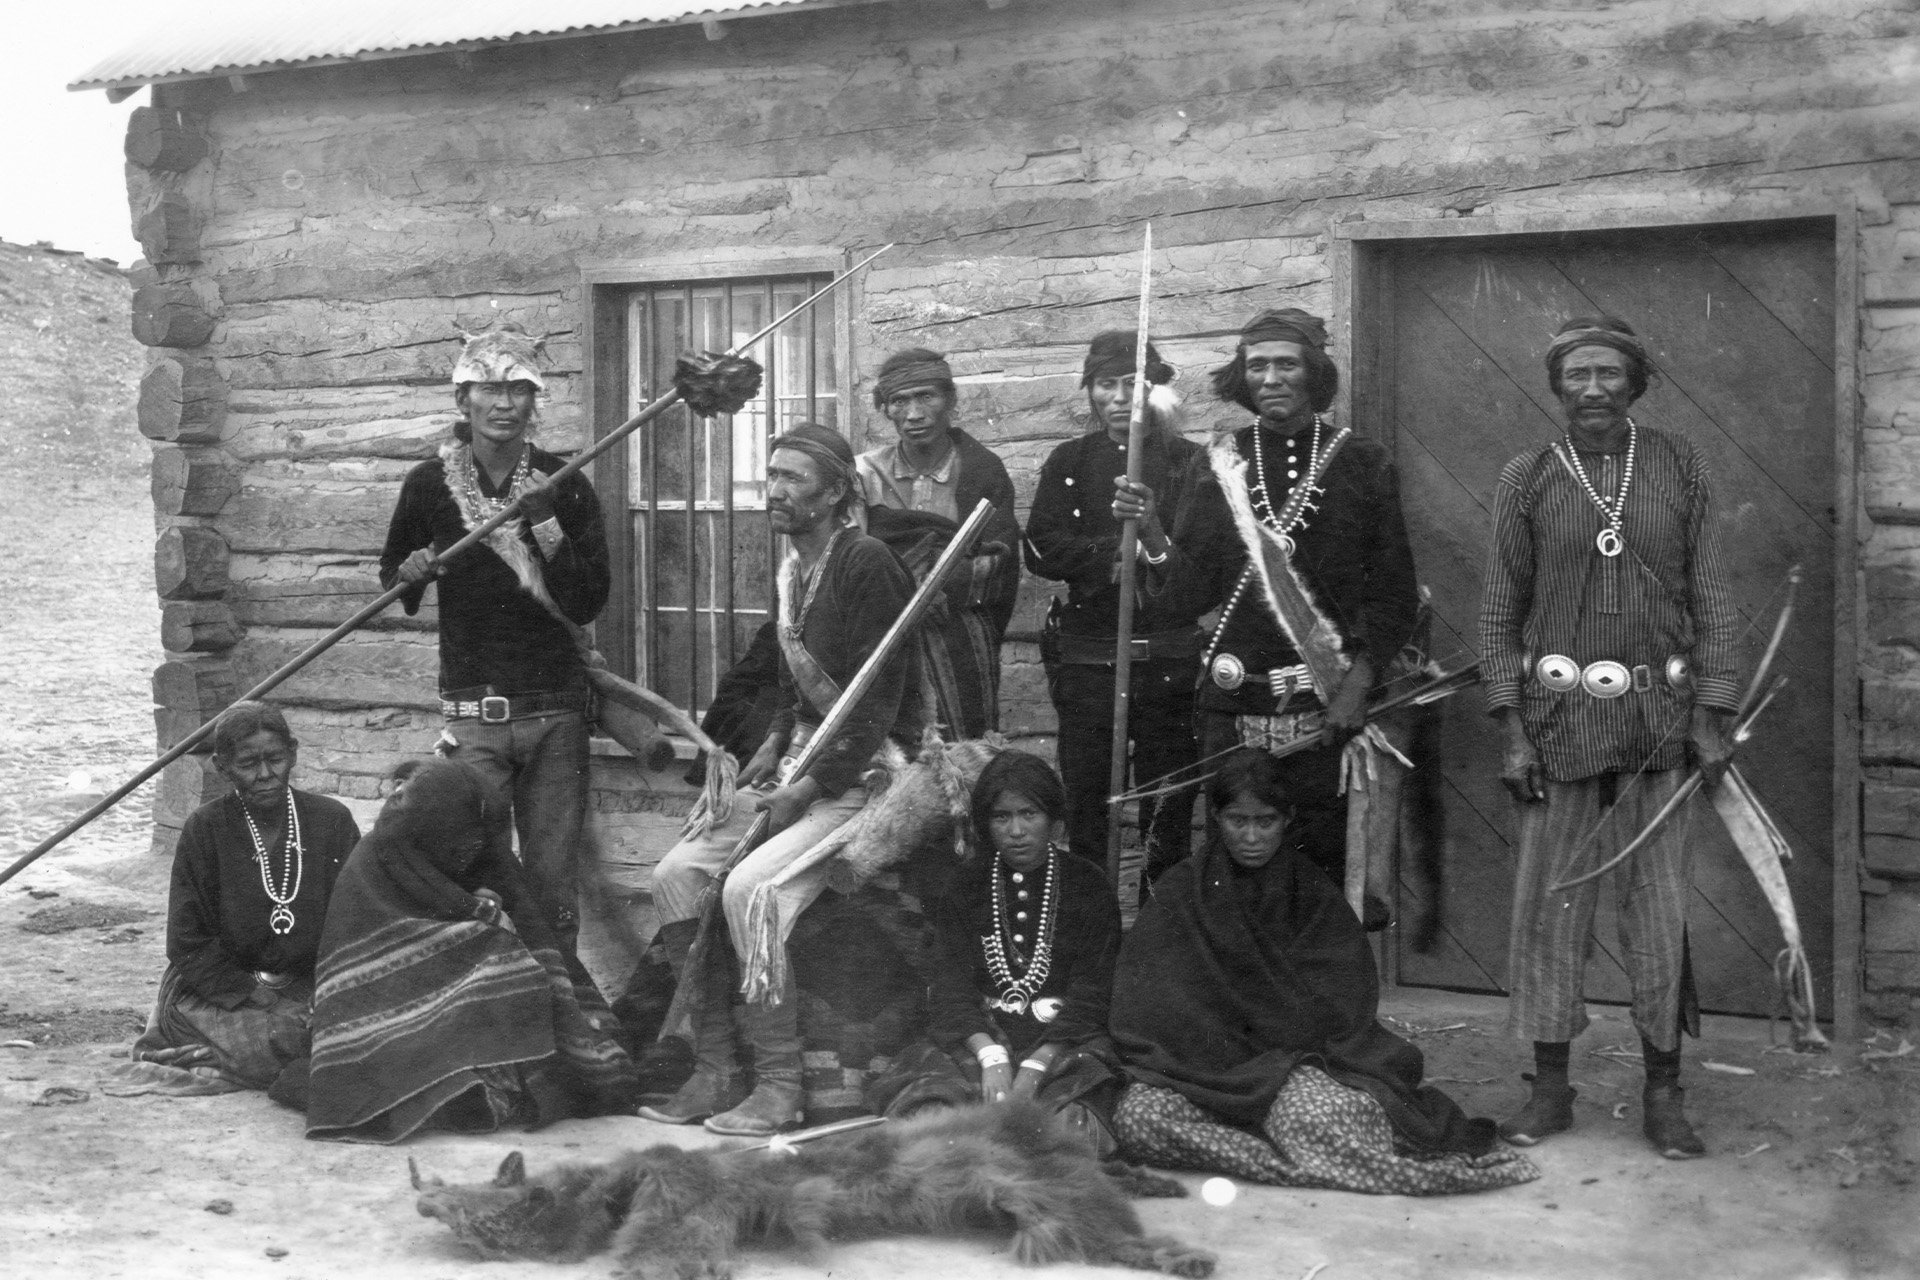 A black and white photo of a group of Native people posing in front of a house.